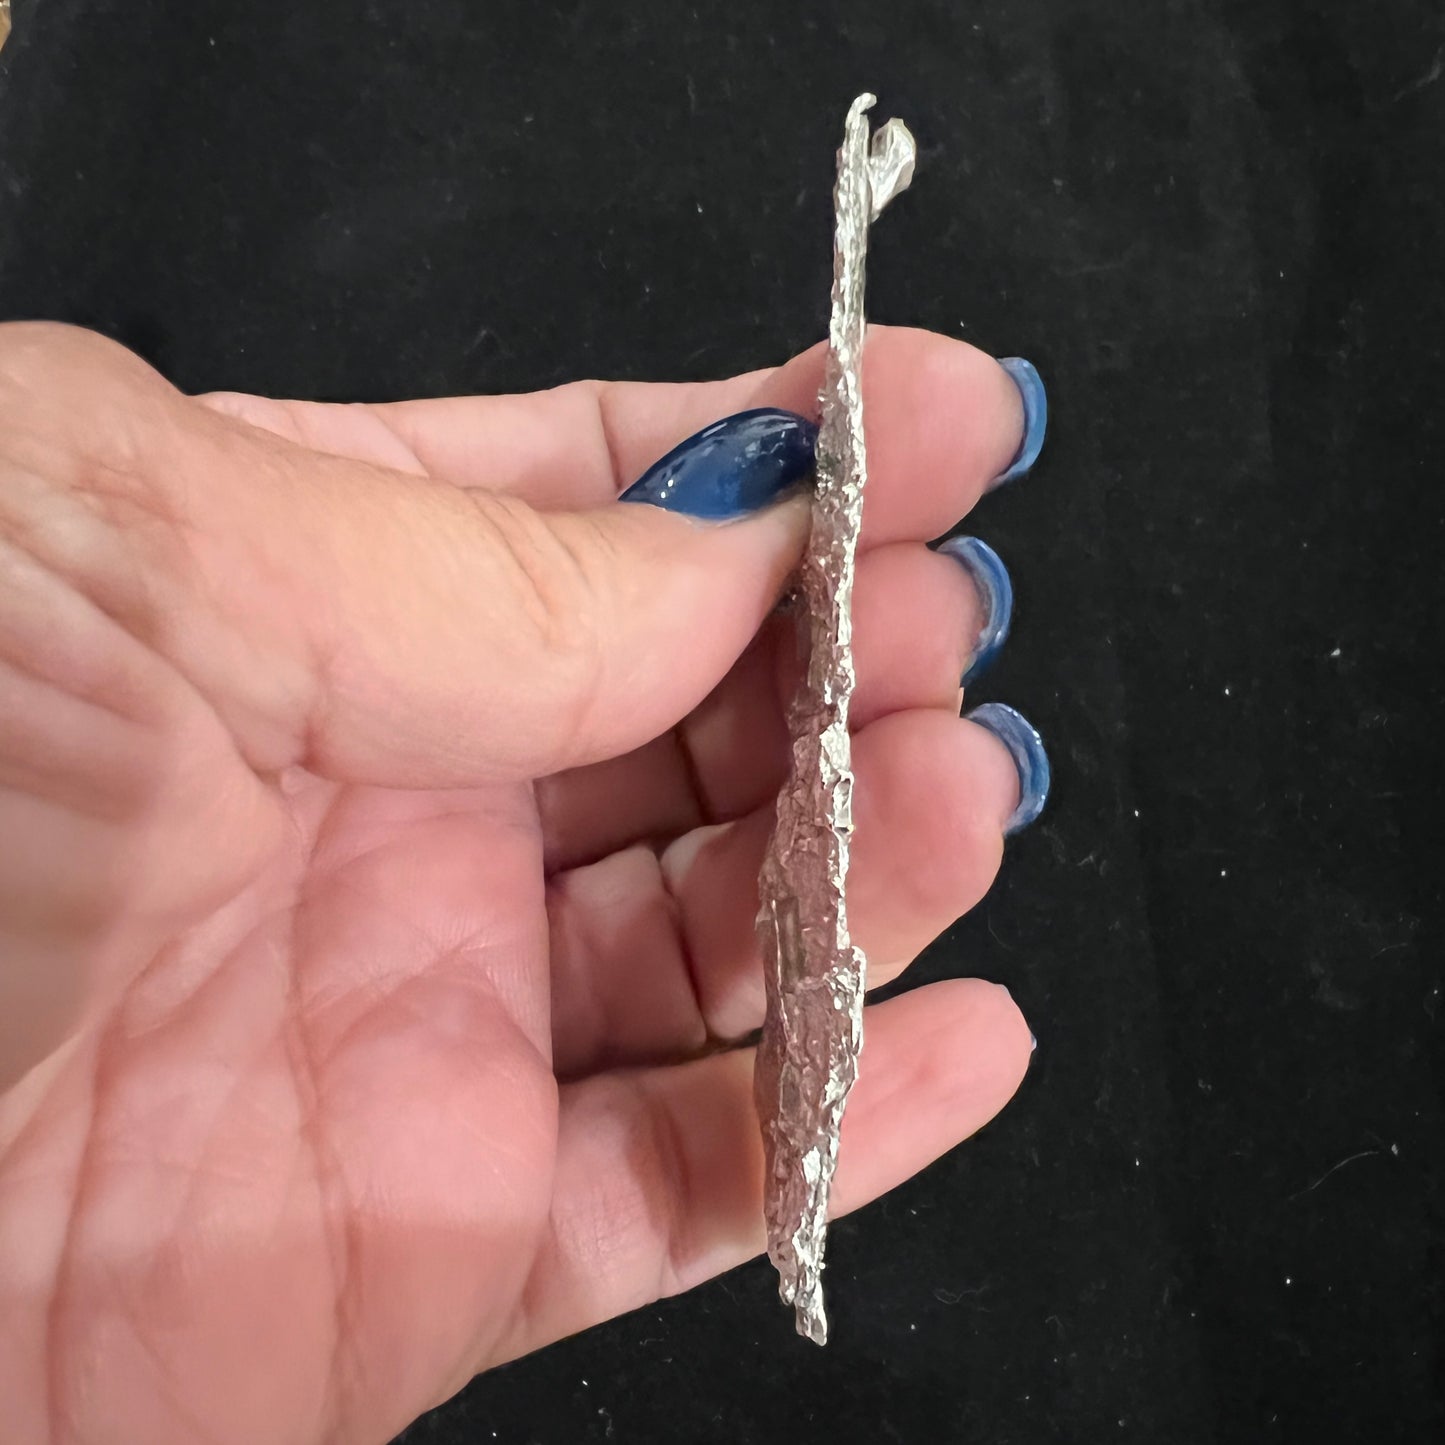 Tree Bark cast in Sterling Silver for Jewelry Design